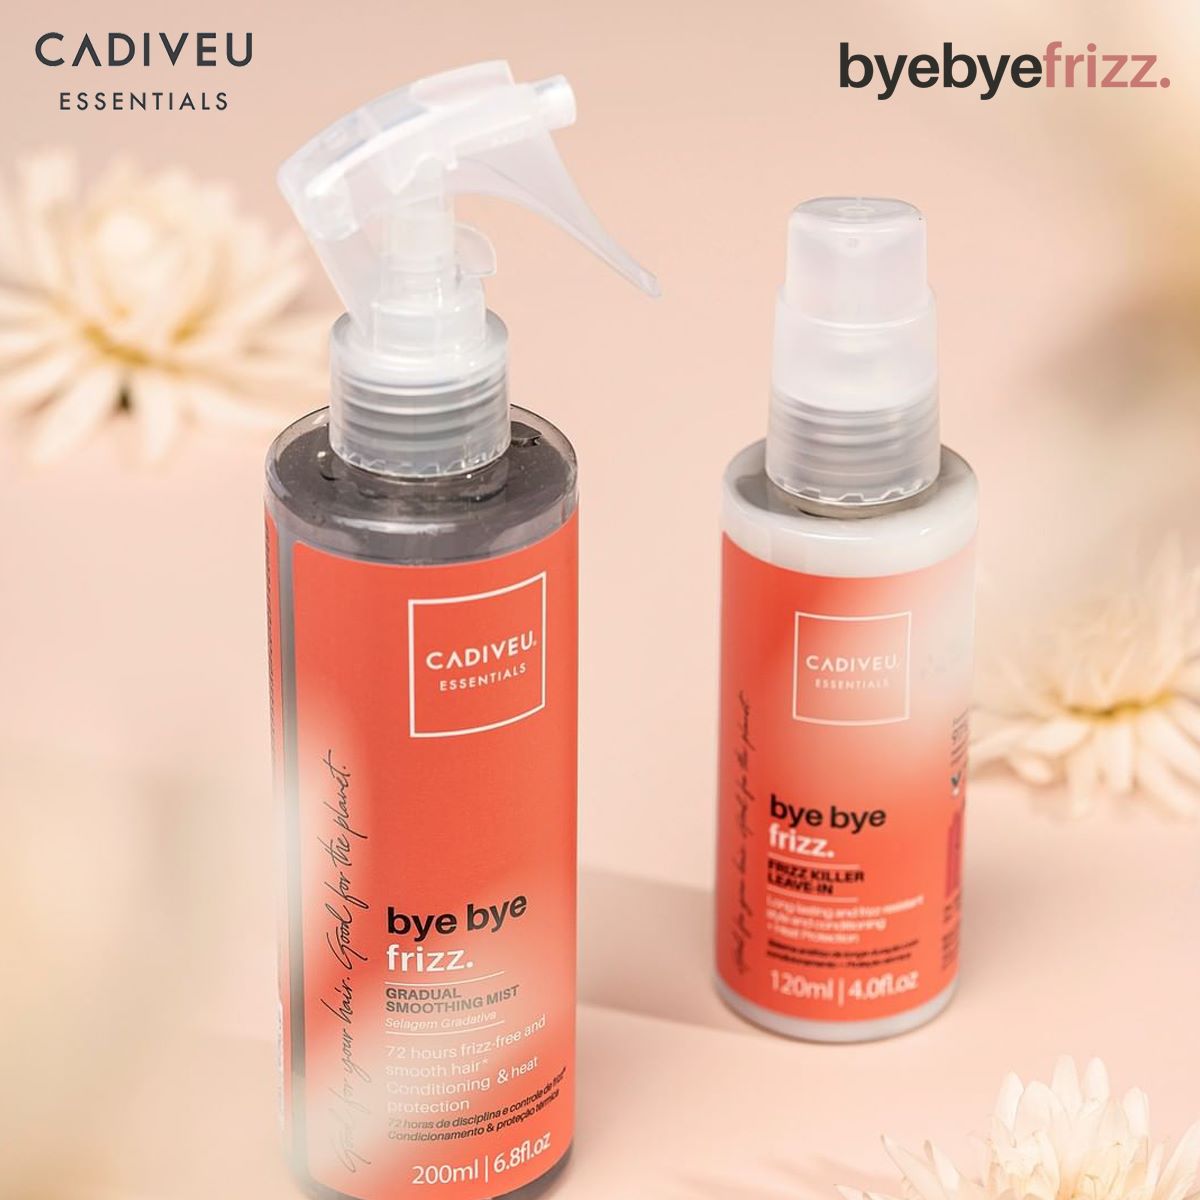 Give your hair the nutrition it needs and lock in smoothness by using Bye Bye Frizz.
#ByeByeFrizz #CadiveuEssentials #Shampoo #Mask #LeaveIn #PetaApproved #HairGoals #FrizzFreeHair #HairCare #SmoothHair #CadiveuIndia #CadiveuLovers #Cadiveu